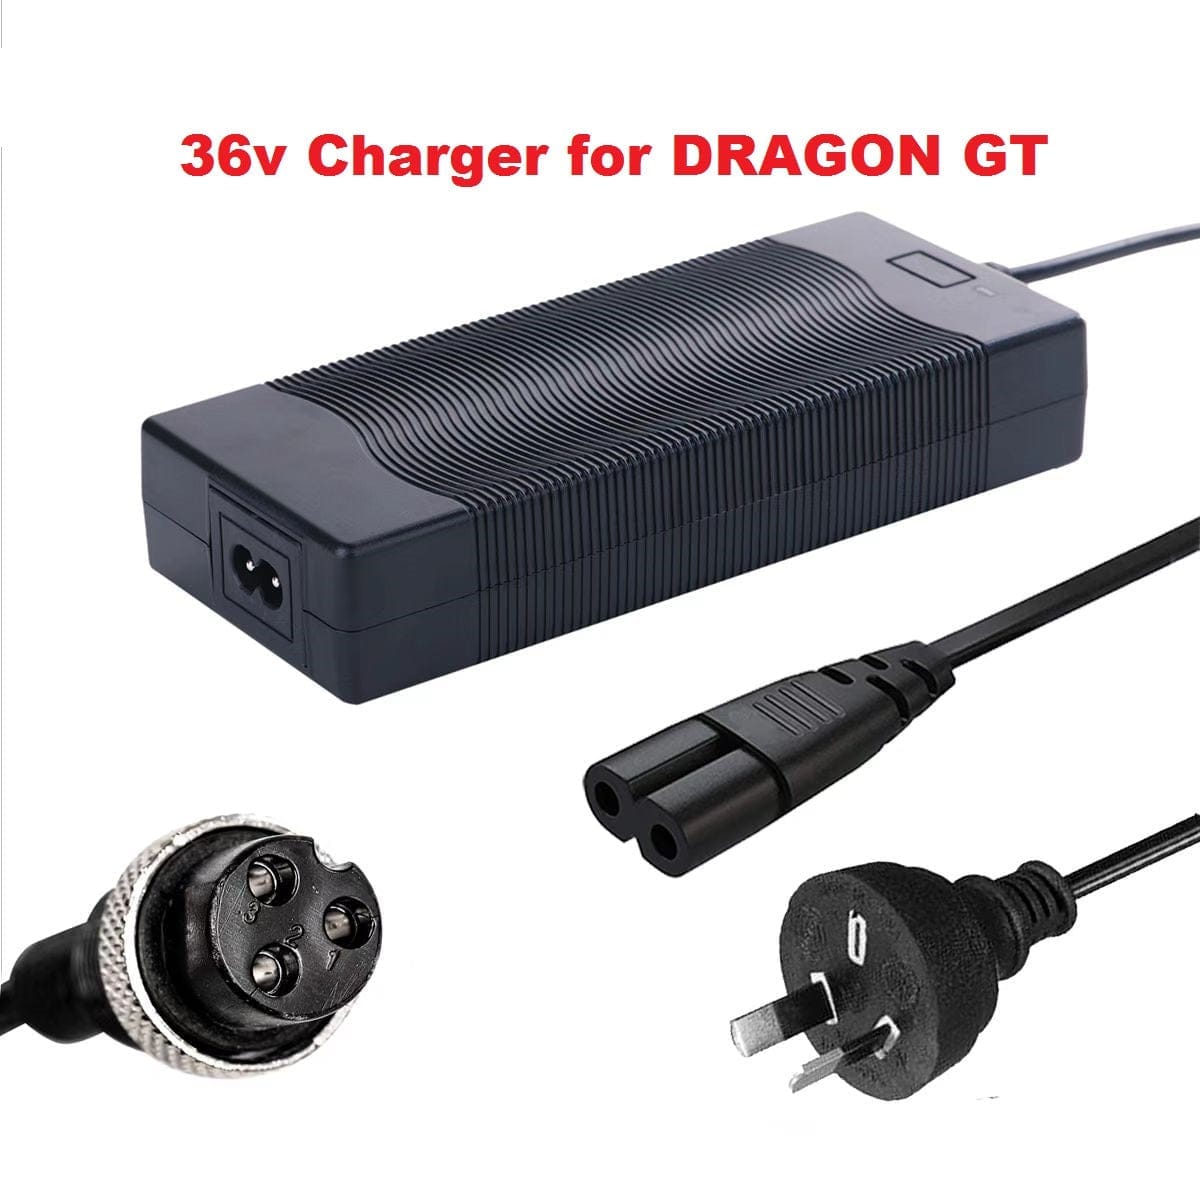 36V ORIGINAL DRAGON CHARGER FOR DRAGON GT ELECTRIC SCOOTER - Bike Scooter City